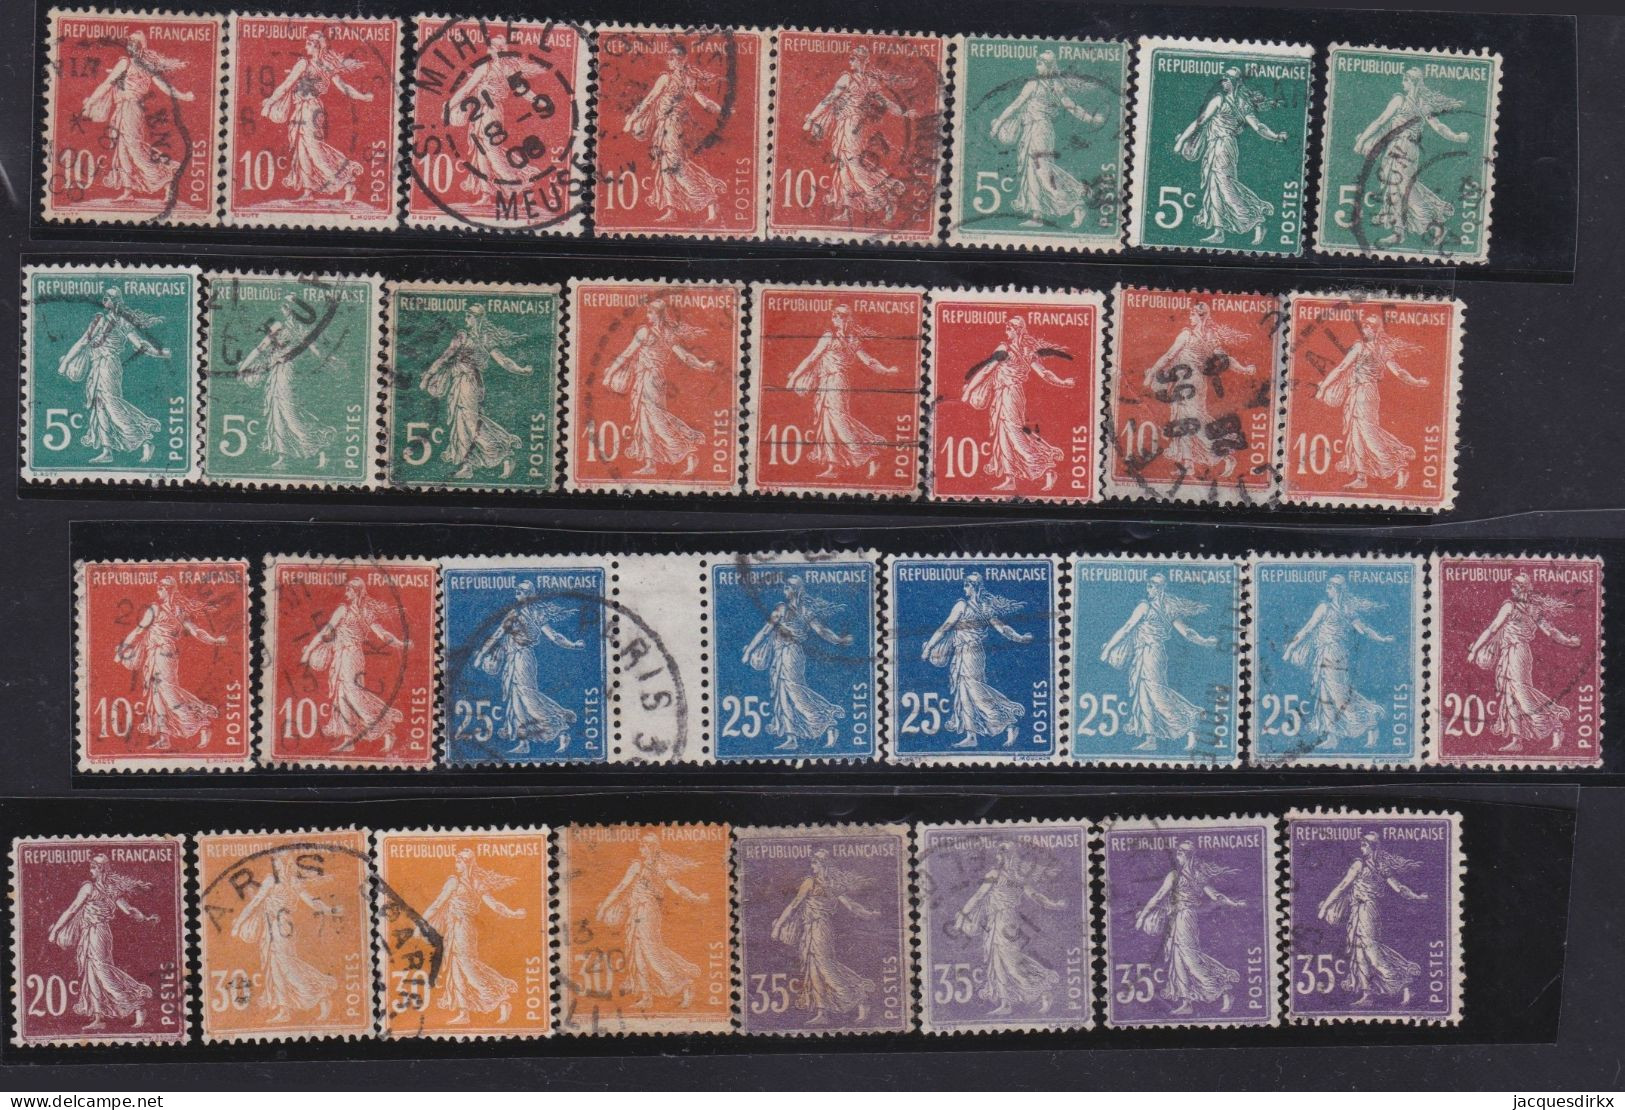 France  .  Y&T   .    32 Timbres     .     O        .     Oblitéré - Used Stamps